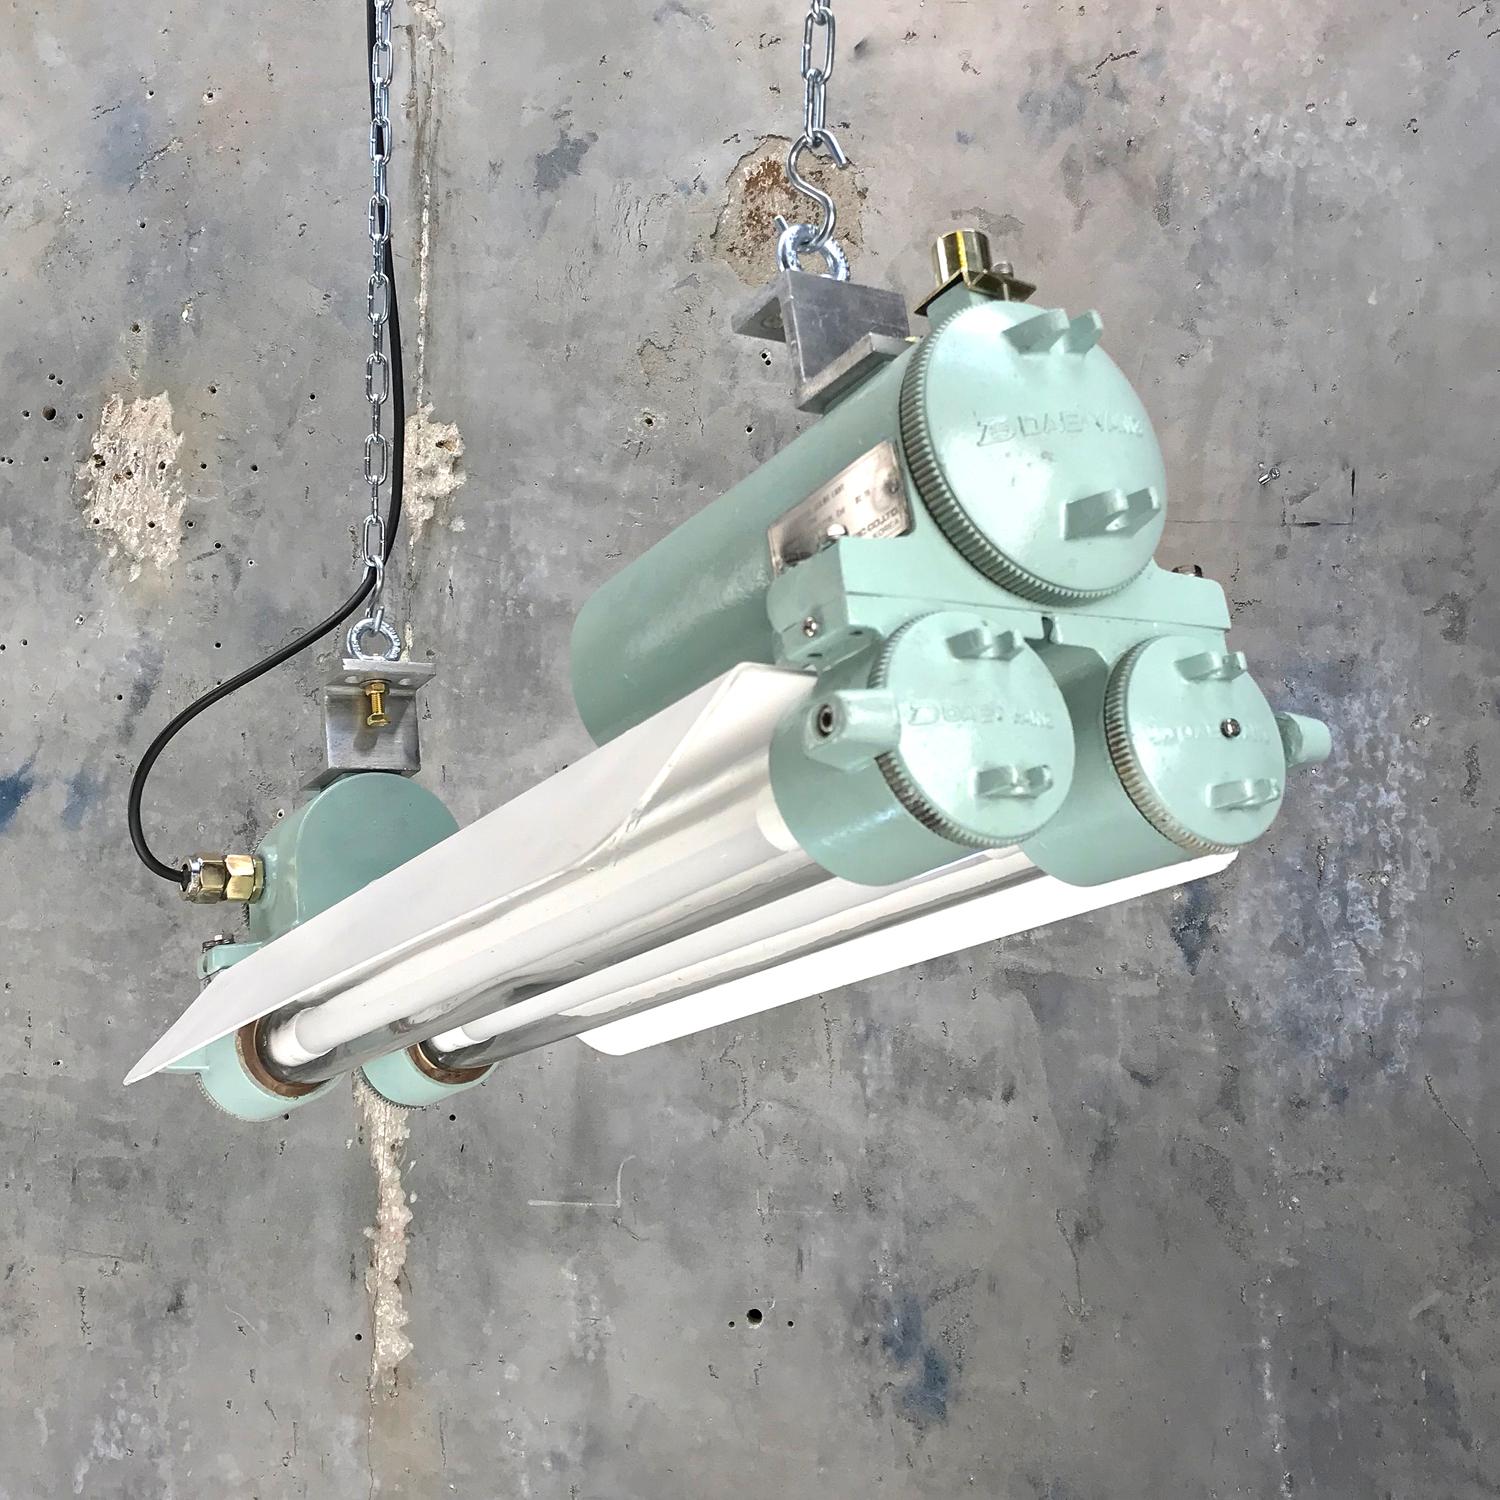 A reclaimed retro industrial Korean flameproof strip light made by Daeyang in 1970's finished in original marine colours very similar to duck egg.
 
Originally salvaged from super tankers, cargo ships and military vessels.  Professionally restored